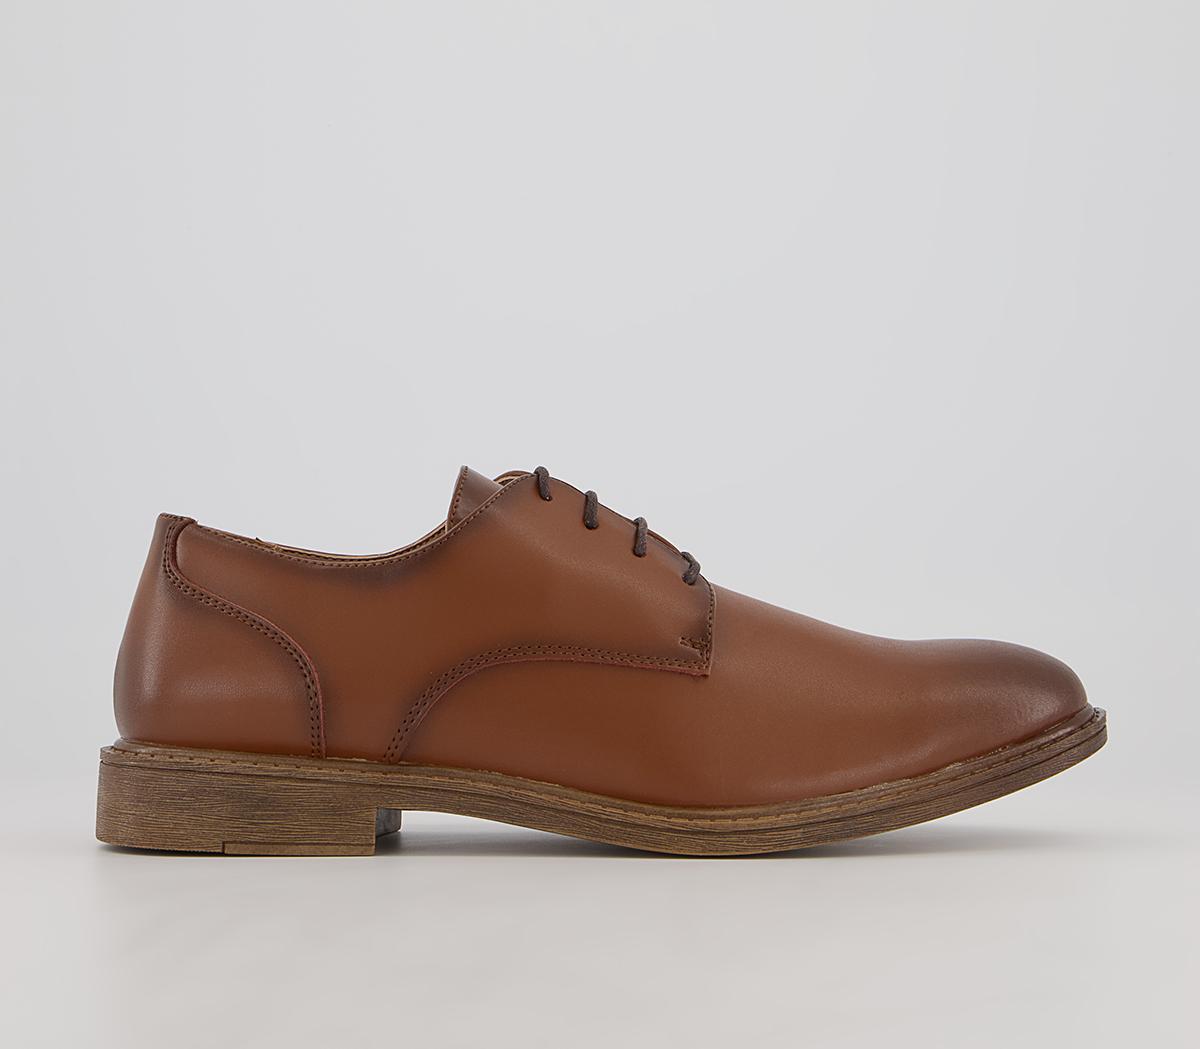 OfficeCurton Smart Casual Derby ShoesTan Leather